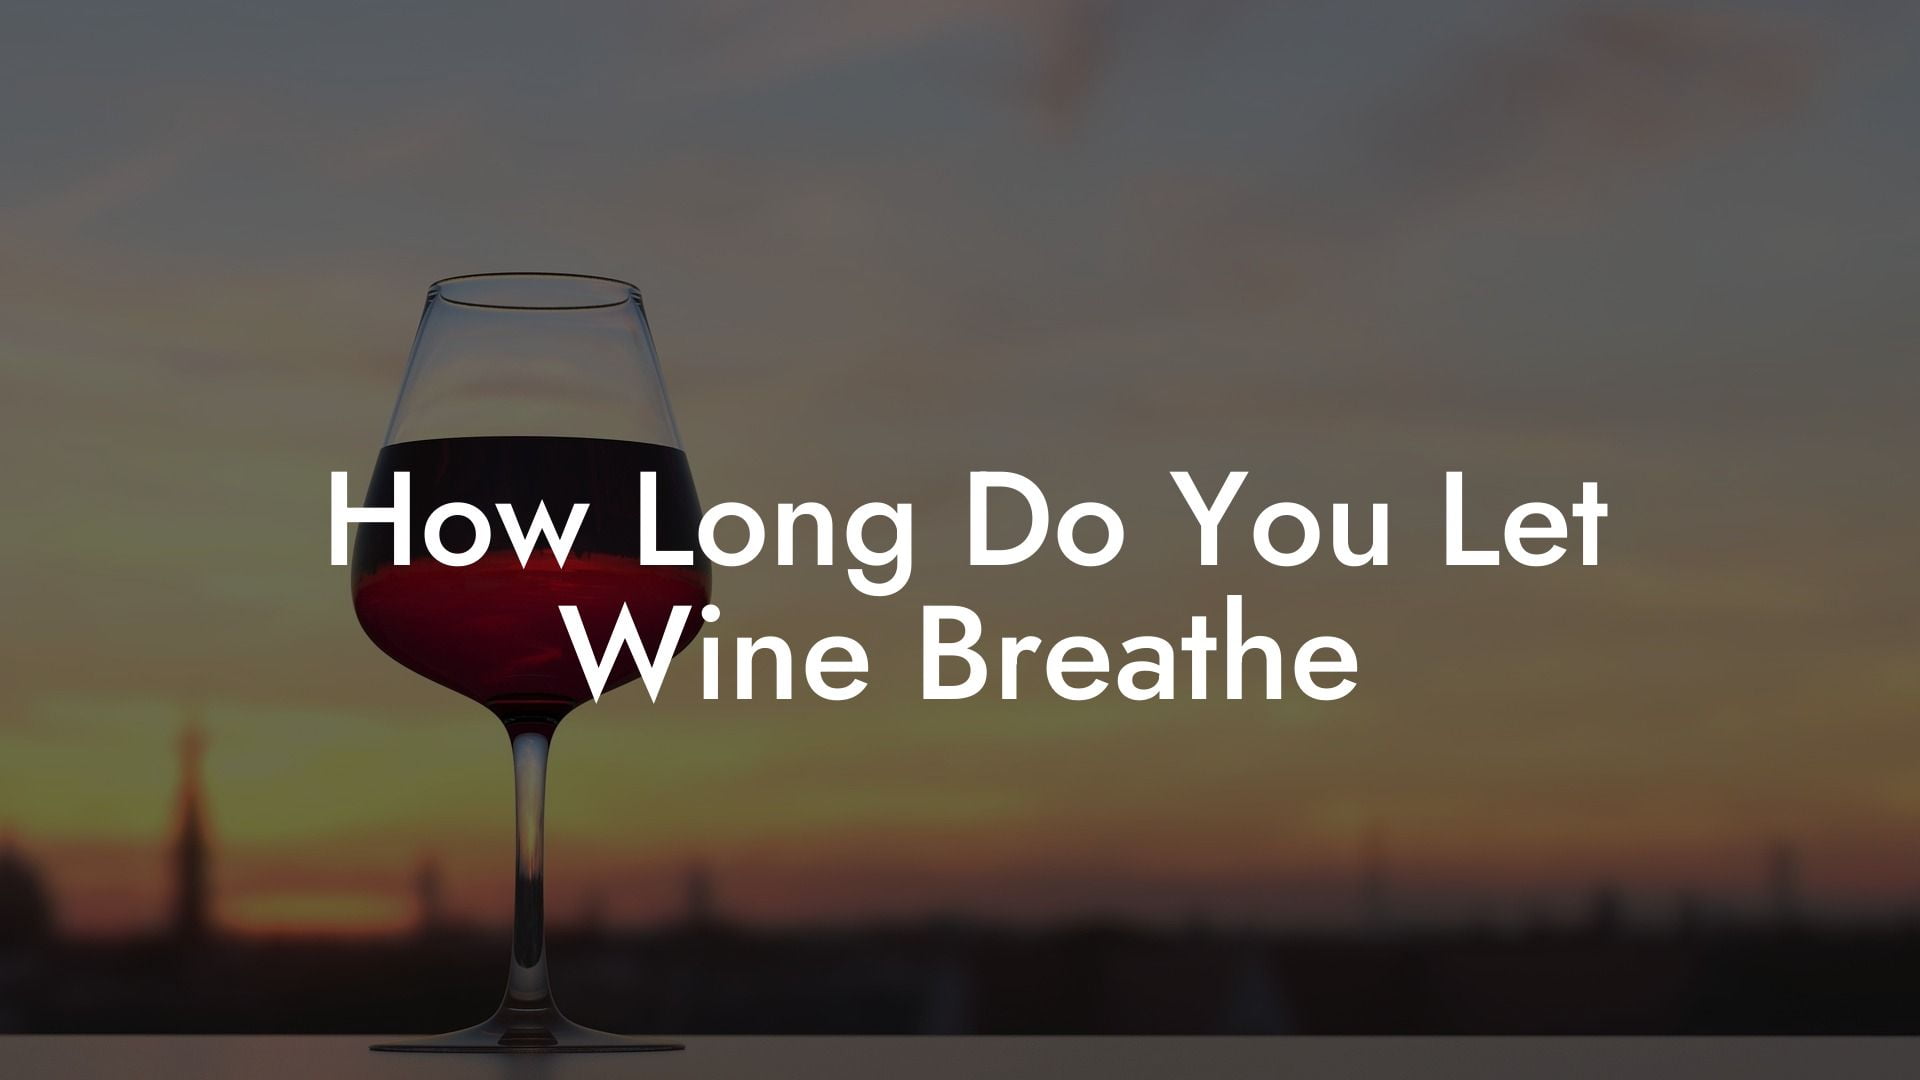 How Long Do You Let Wine Breathe